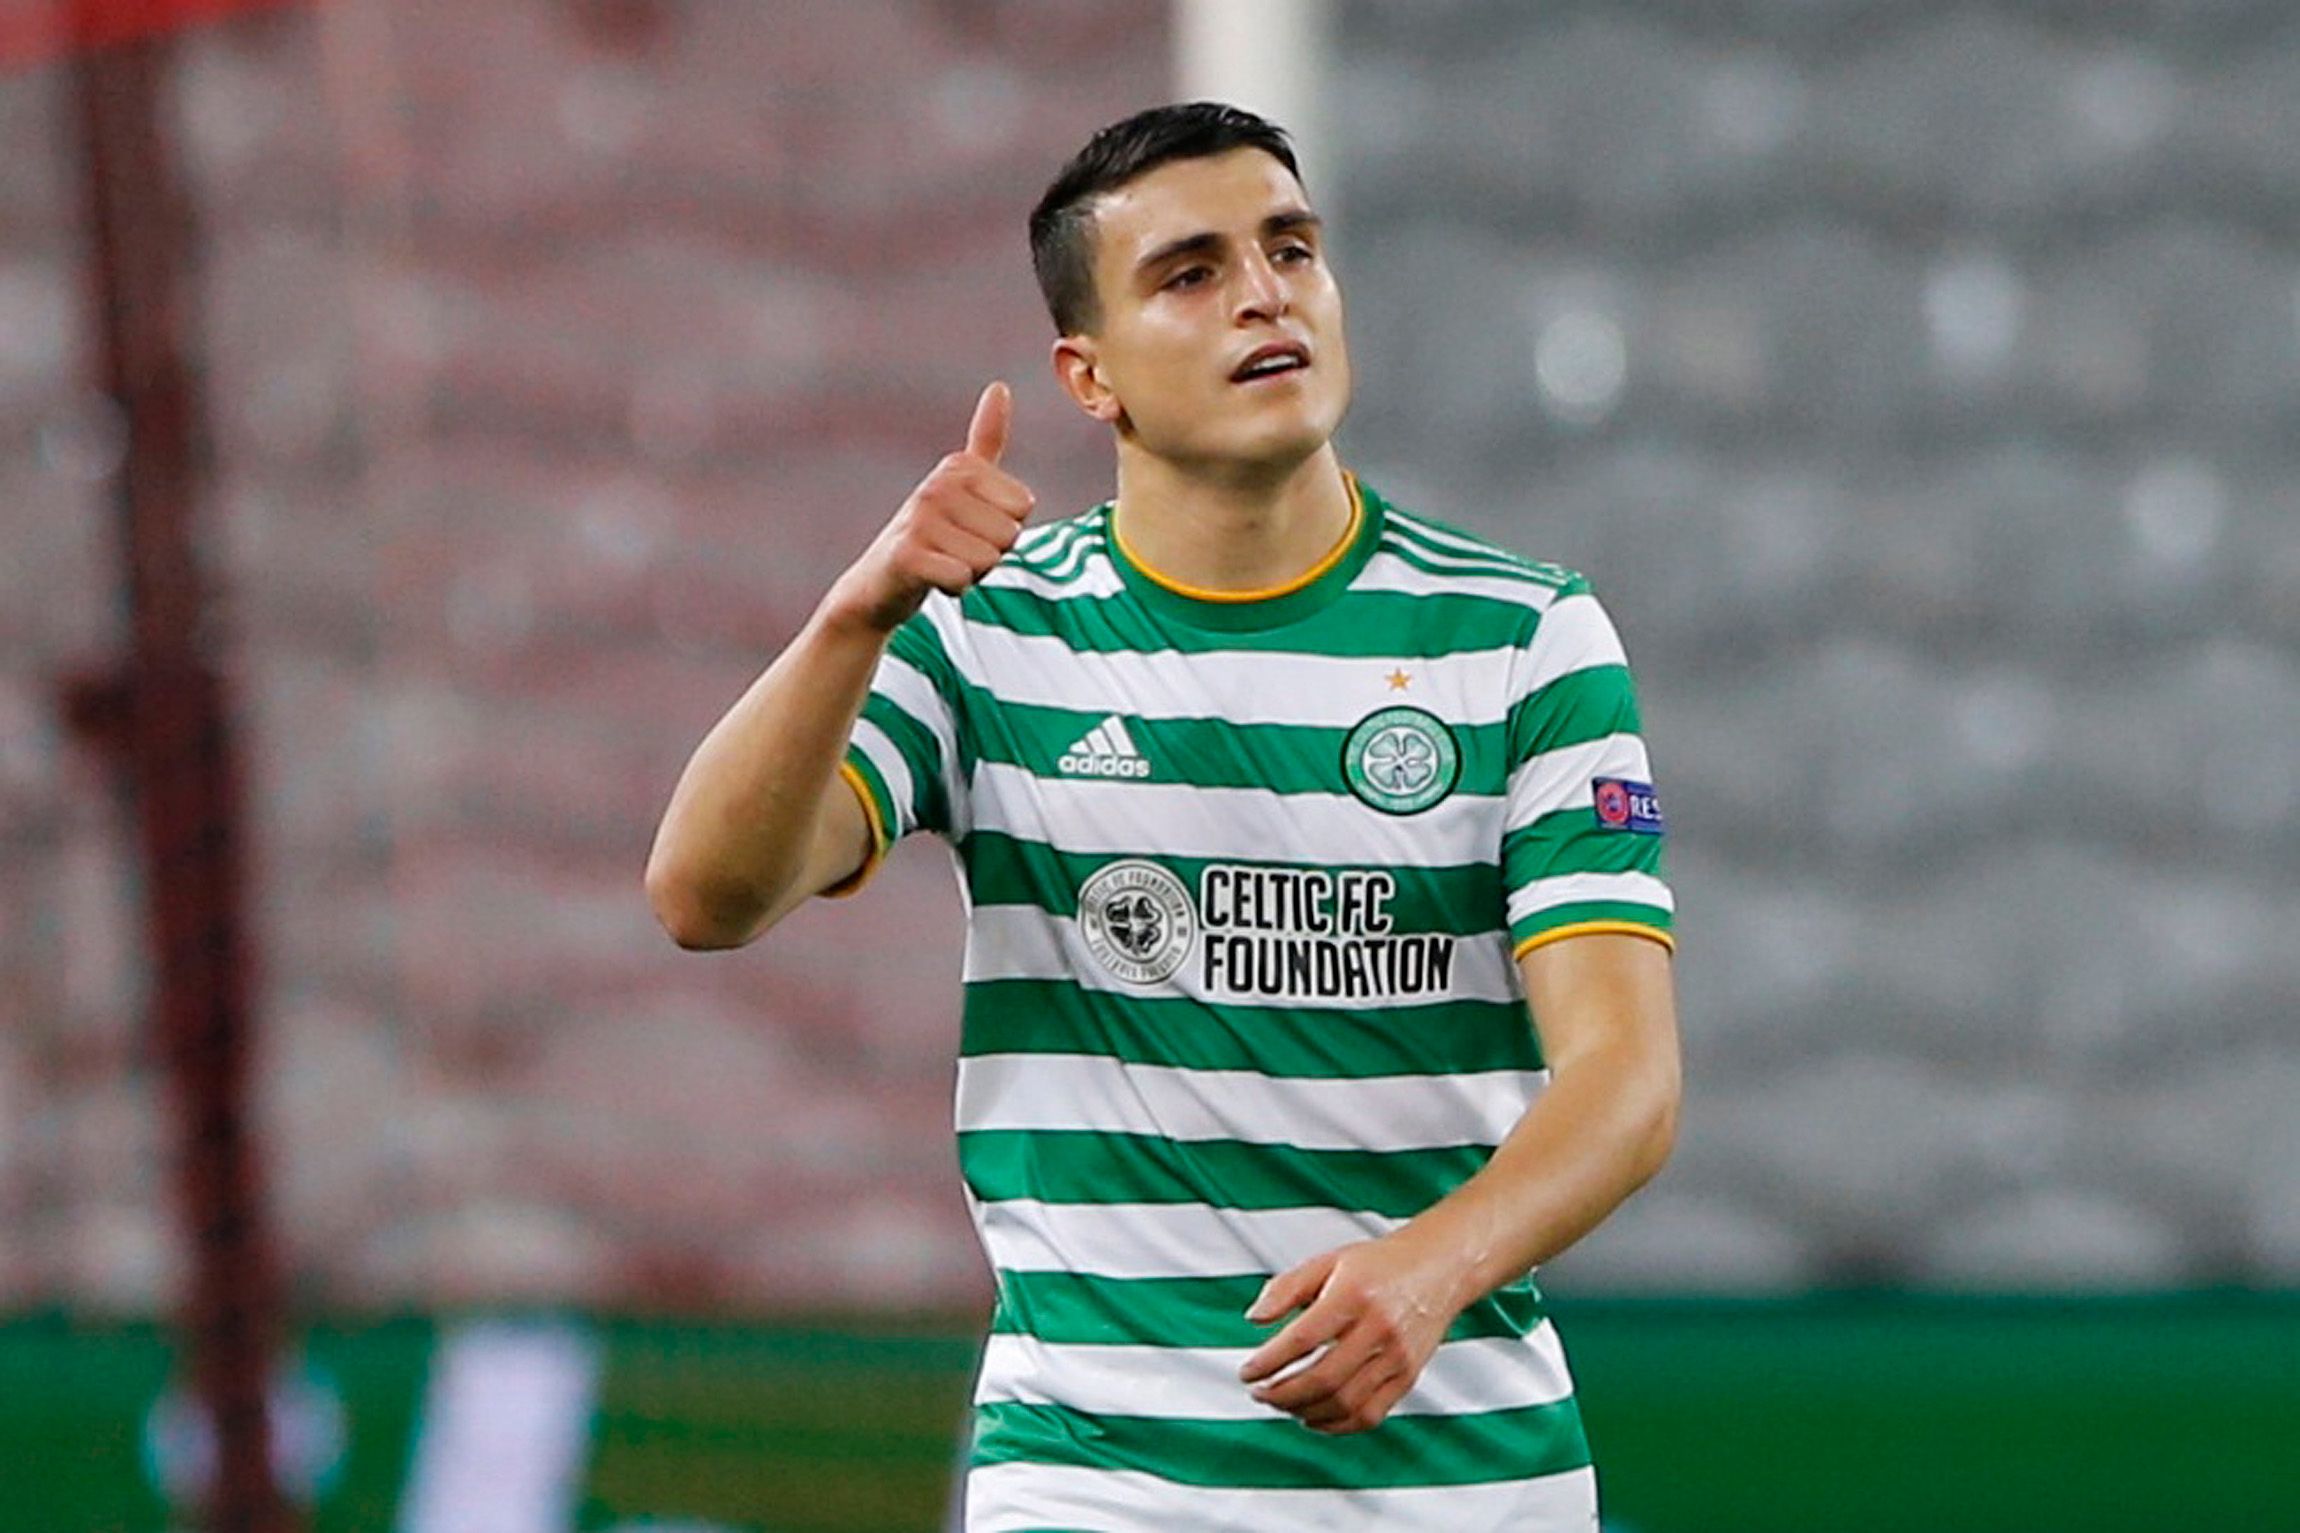 Soccer Football - Europa League - Group H - Lille v Celtic - Stade Pierre-Mauroy, Lille, France - October 29, 2020 Celtic’s Mohamed Elyounoussi celebrates scoring their second goal REUTERS/Pascal Rossignol